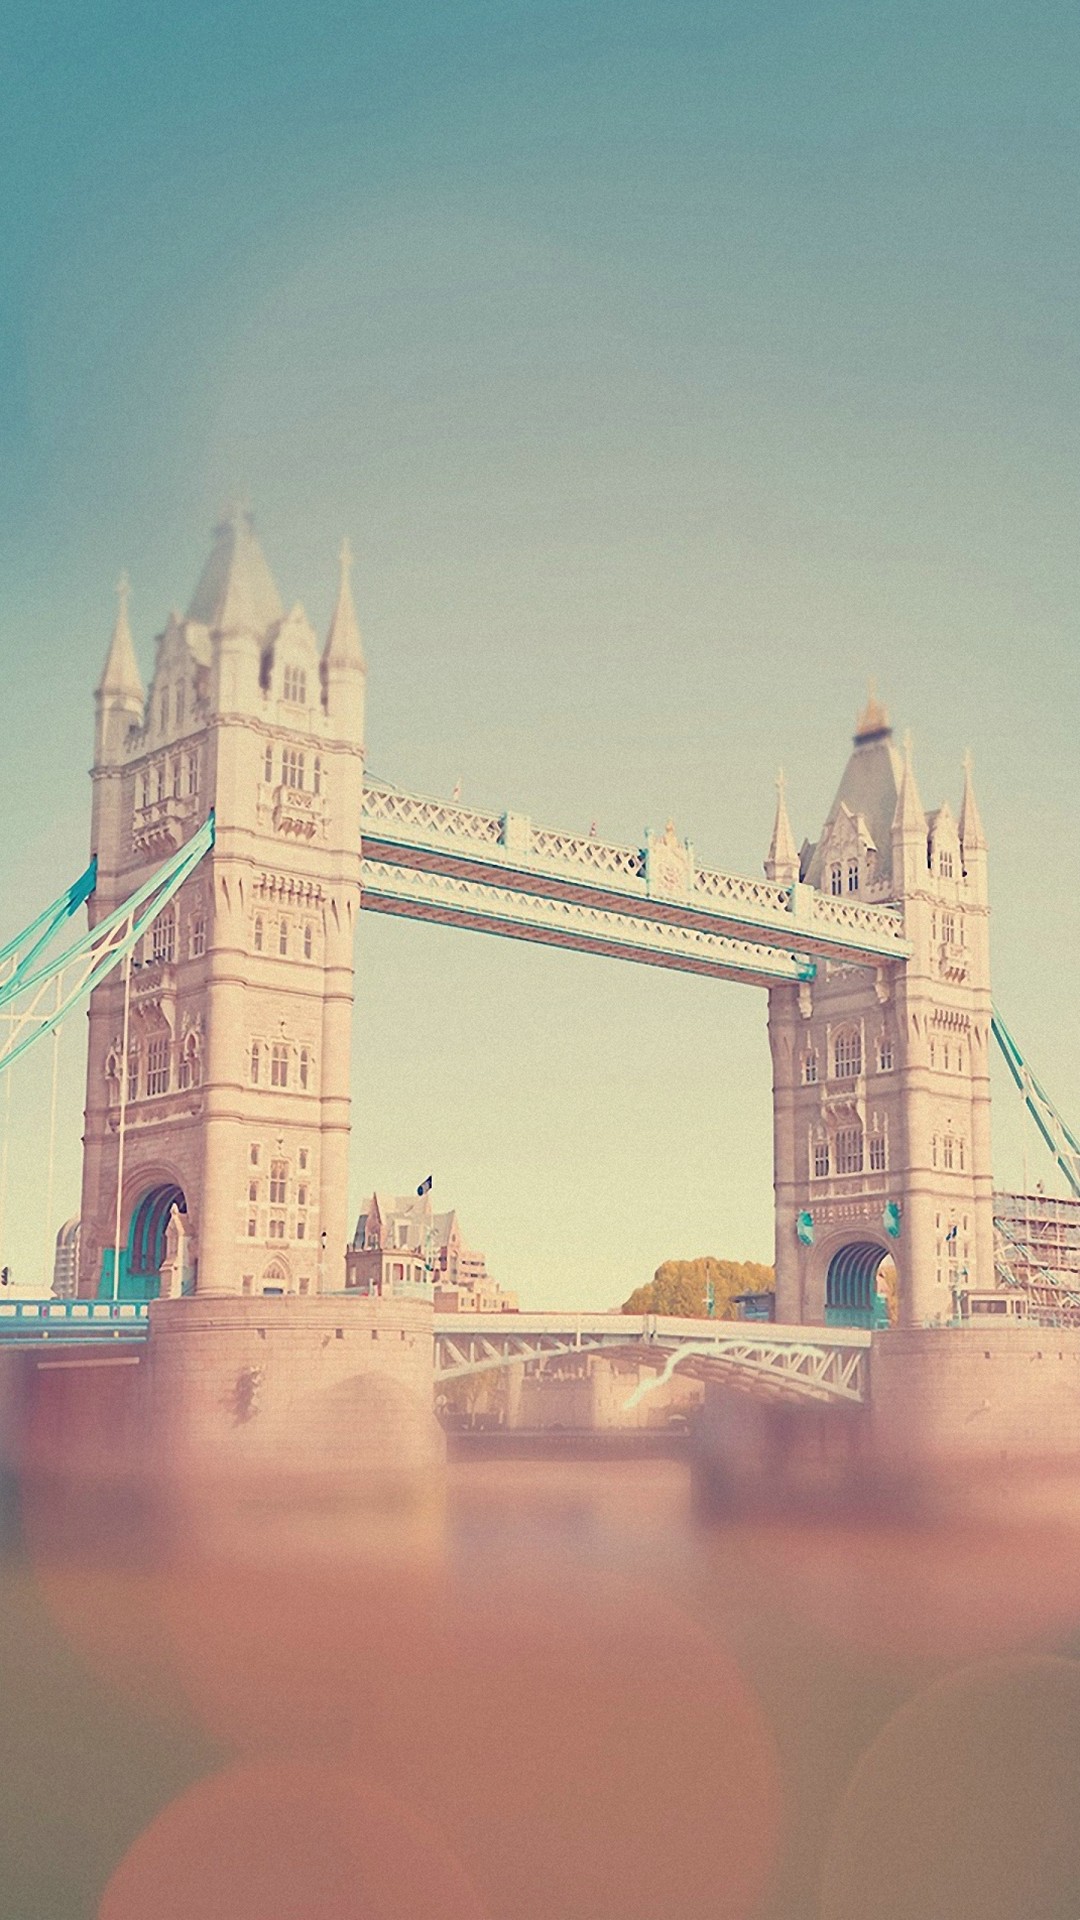 London Bridge Wallpaper Android with HD resolution 1080x1920